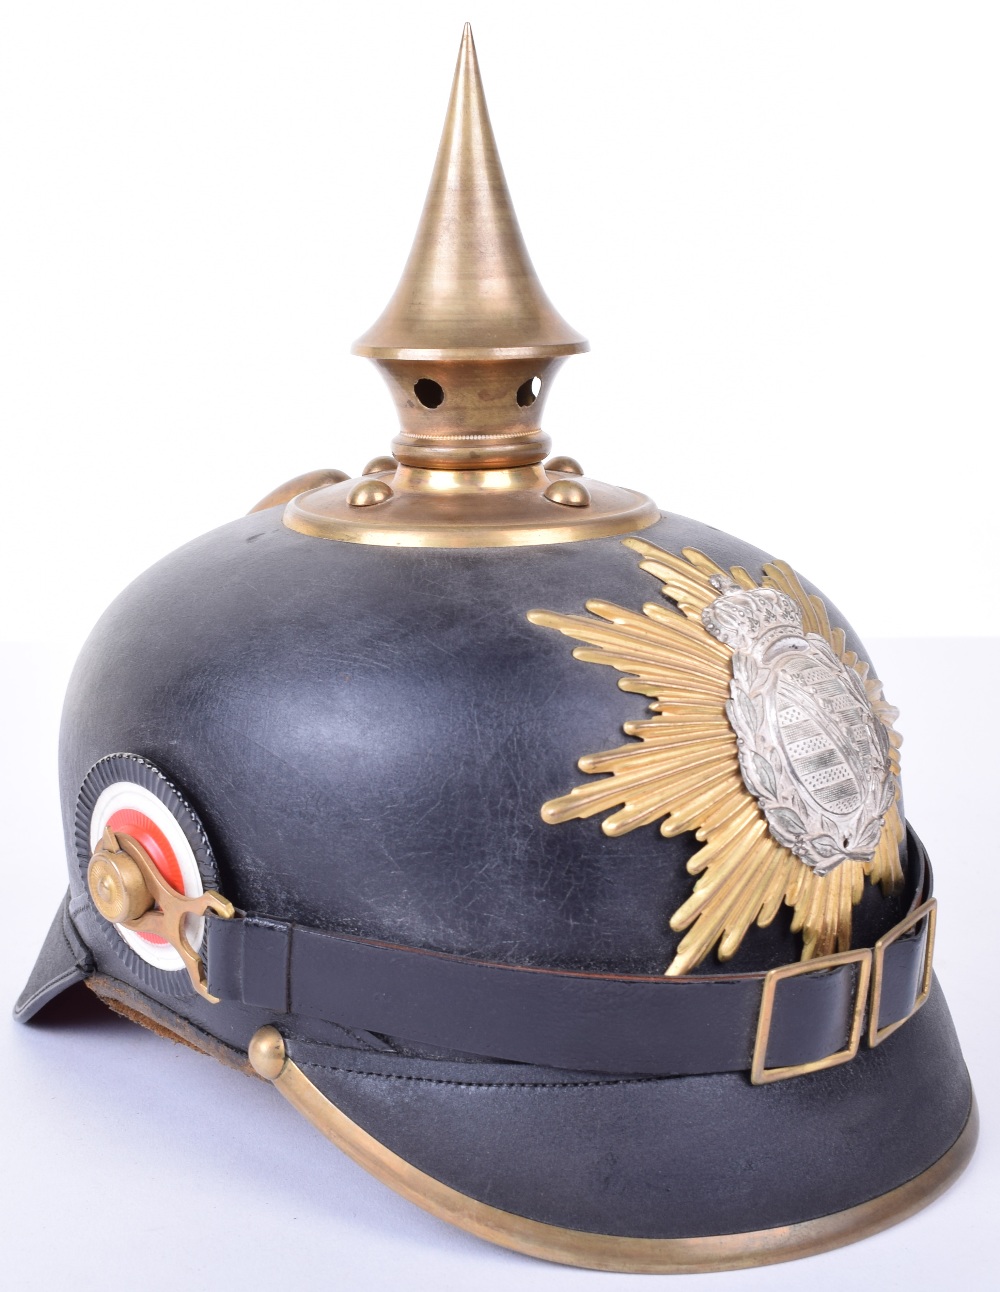 Saxon One Year Volunteer Pickelhaube with Original Trench Cover - Image 9 of 18